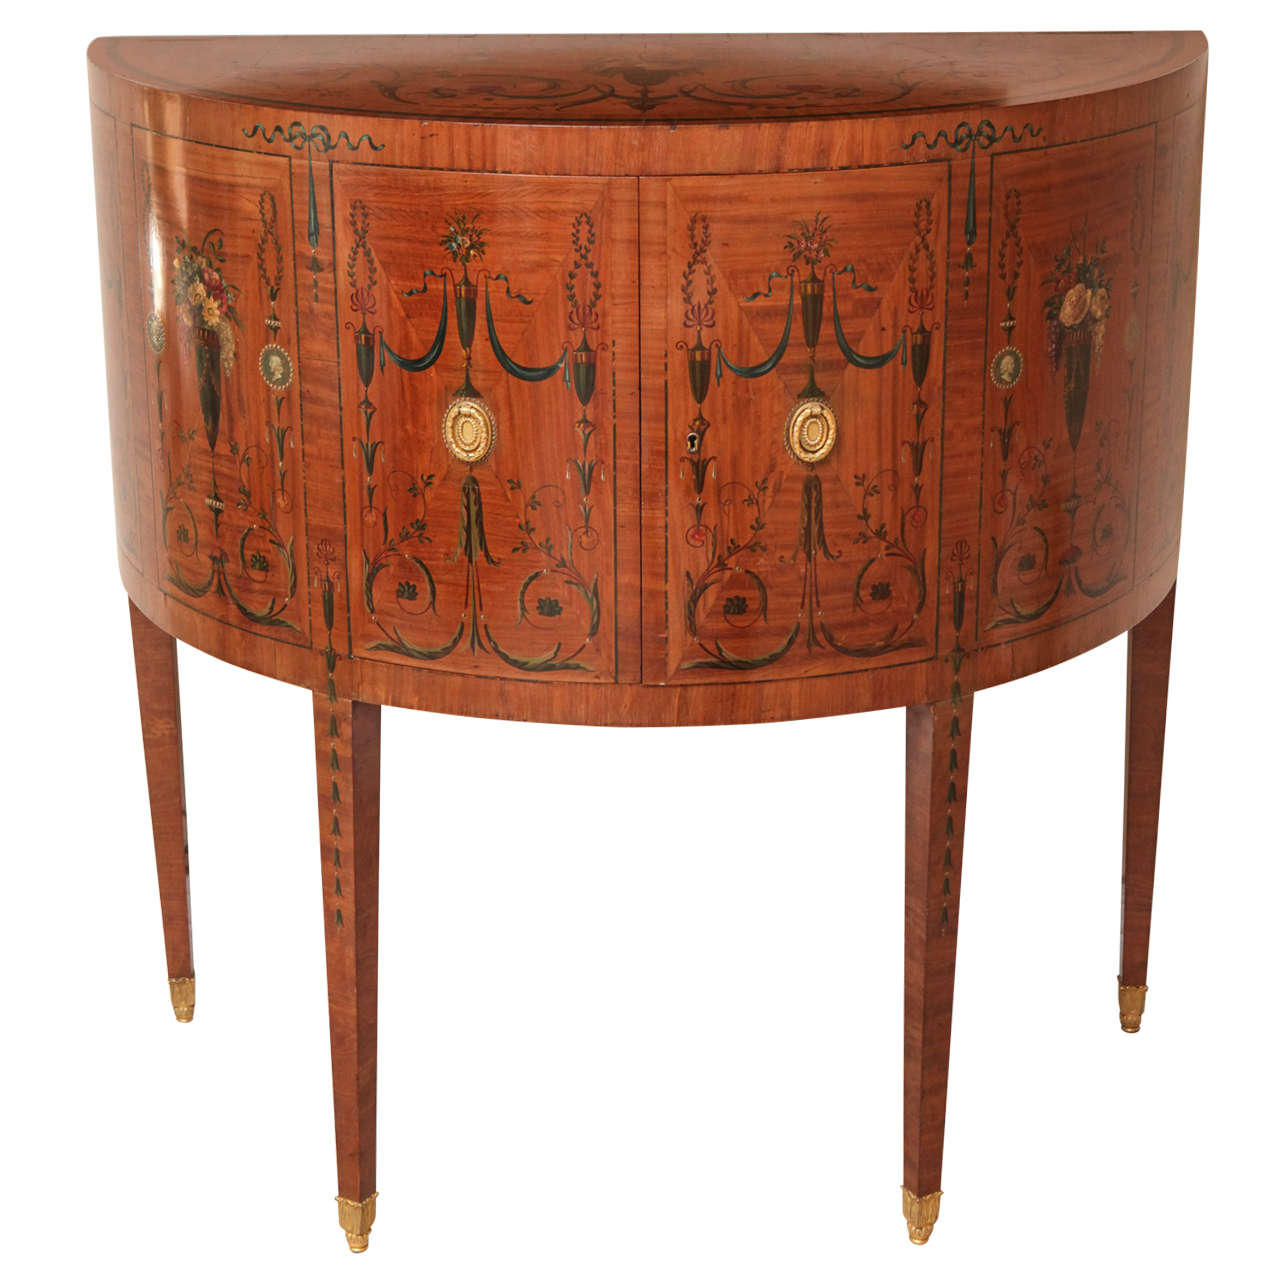 19th Century Edward Caldwell Satinwood Demilune Console Table